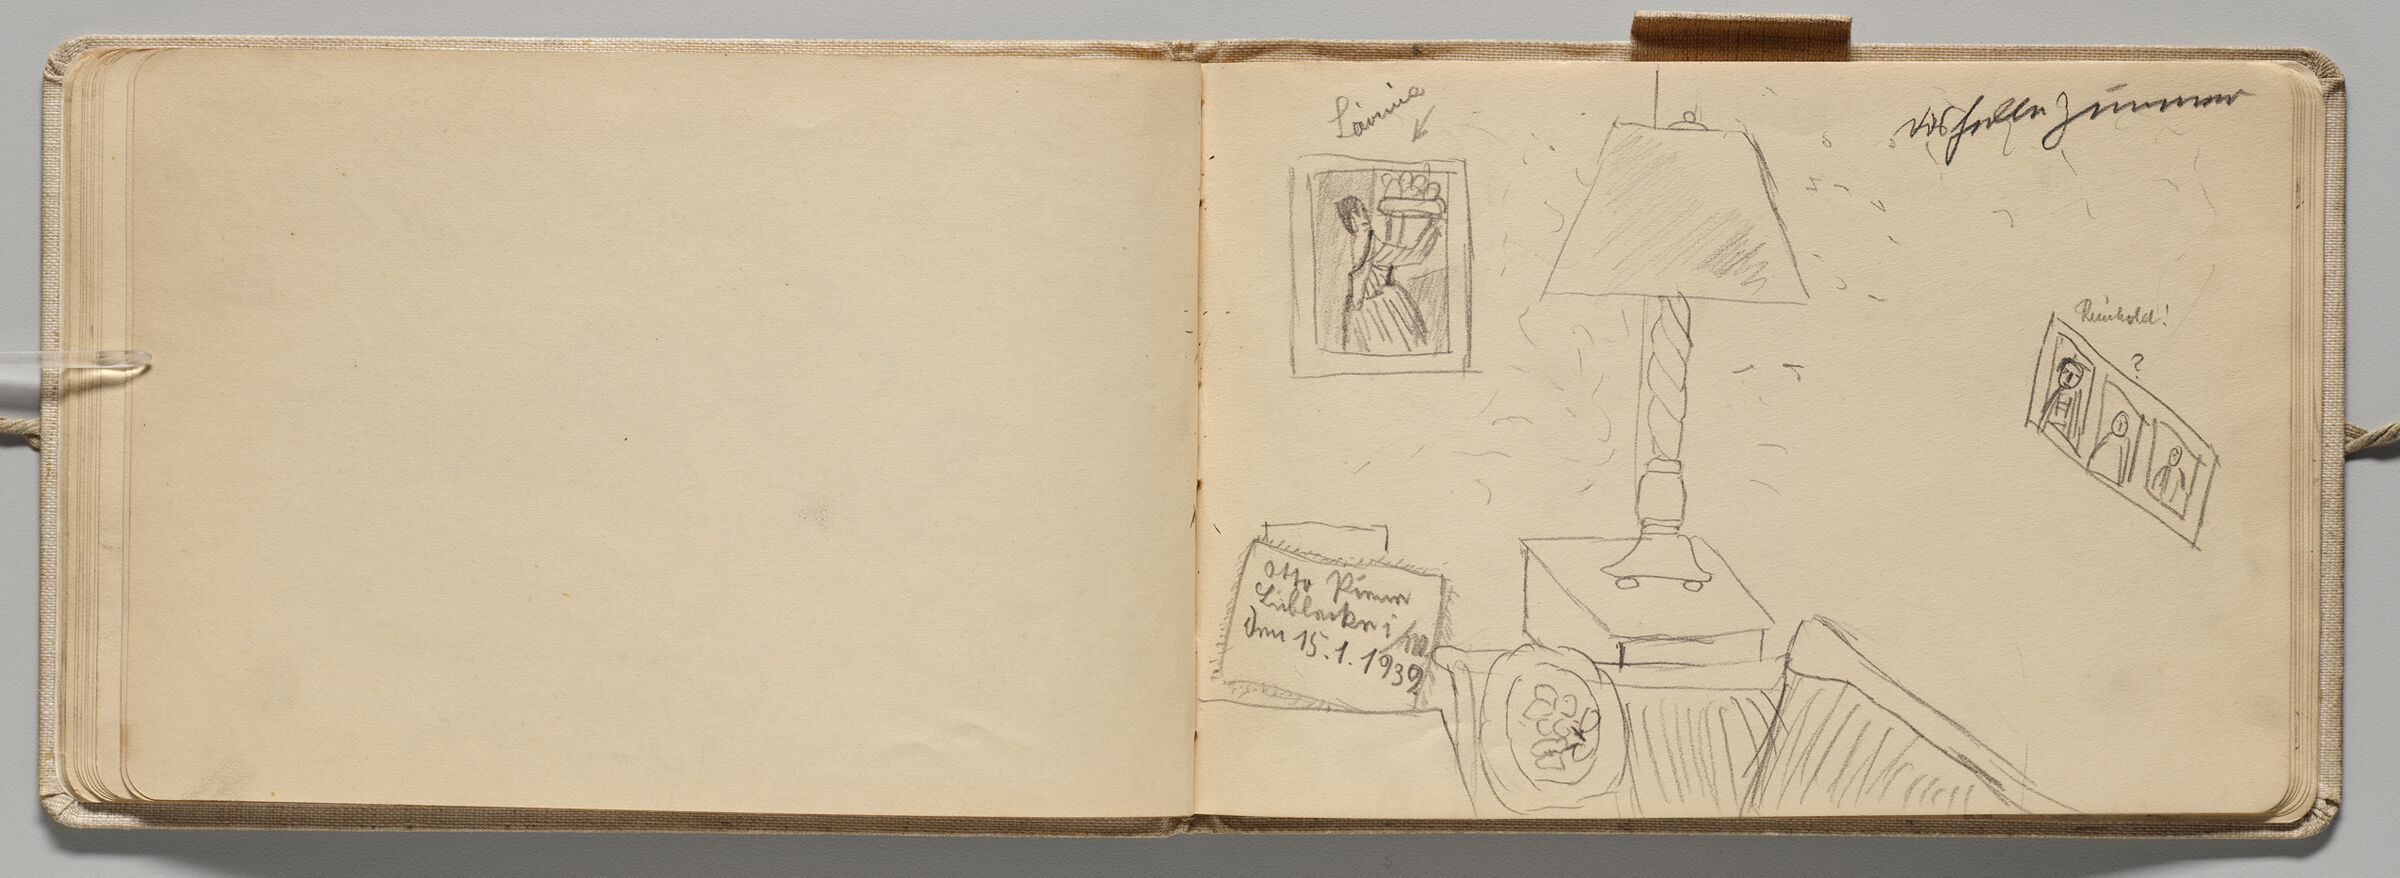 Untitled (Blank, Left Page); Untitled (Domestic Interior, Right Page)